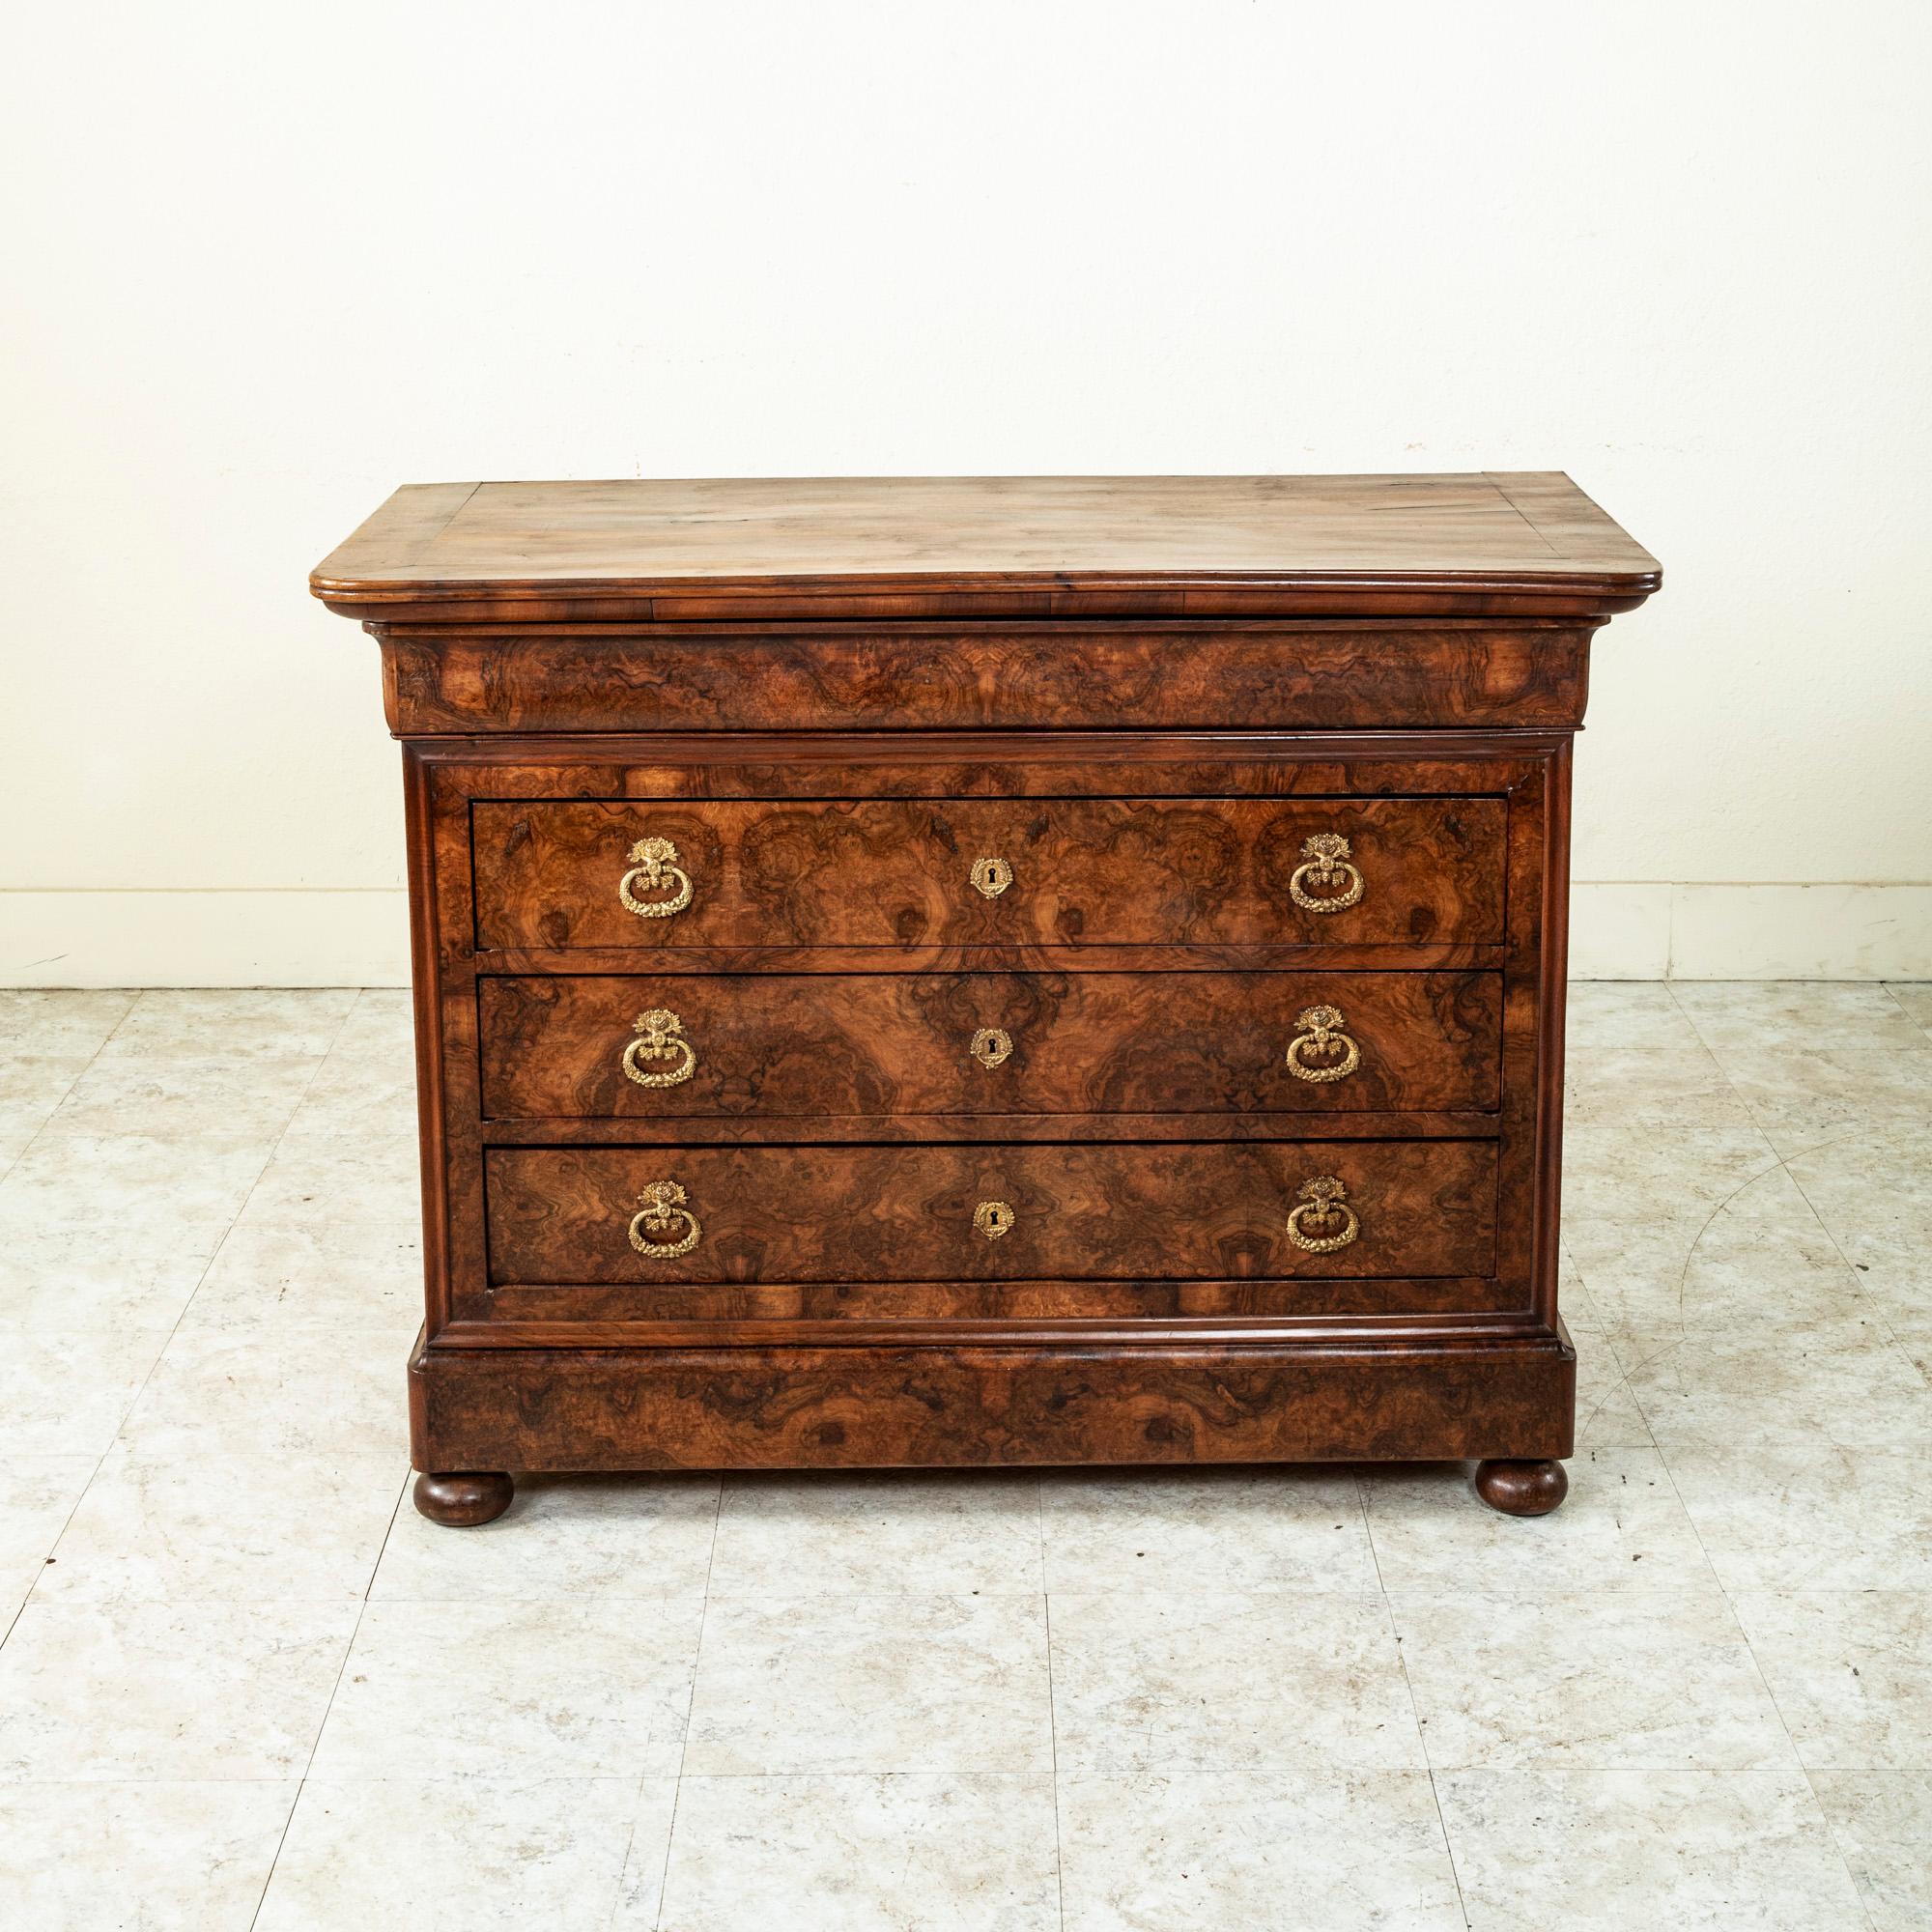 This mid-nineteenth century French Restauration period commode or chest of drawers displays exemplary craftsmanship with a facade of book matched burl walnut, solid walnut panel sides, and is finished with a solid wood top. Three lower drawers of